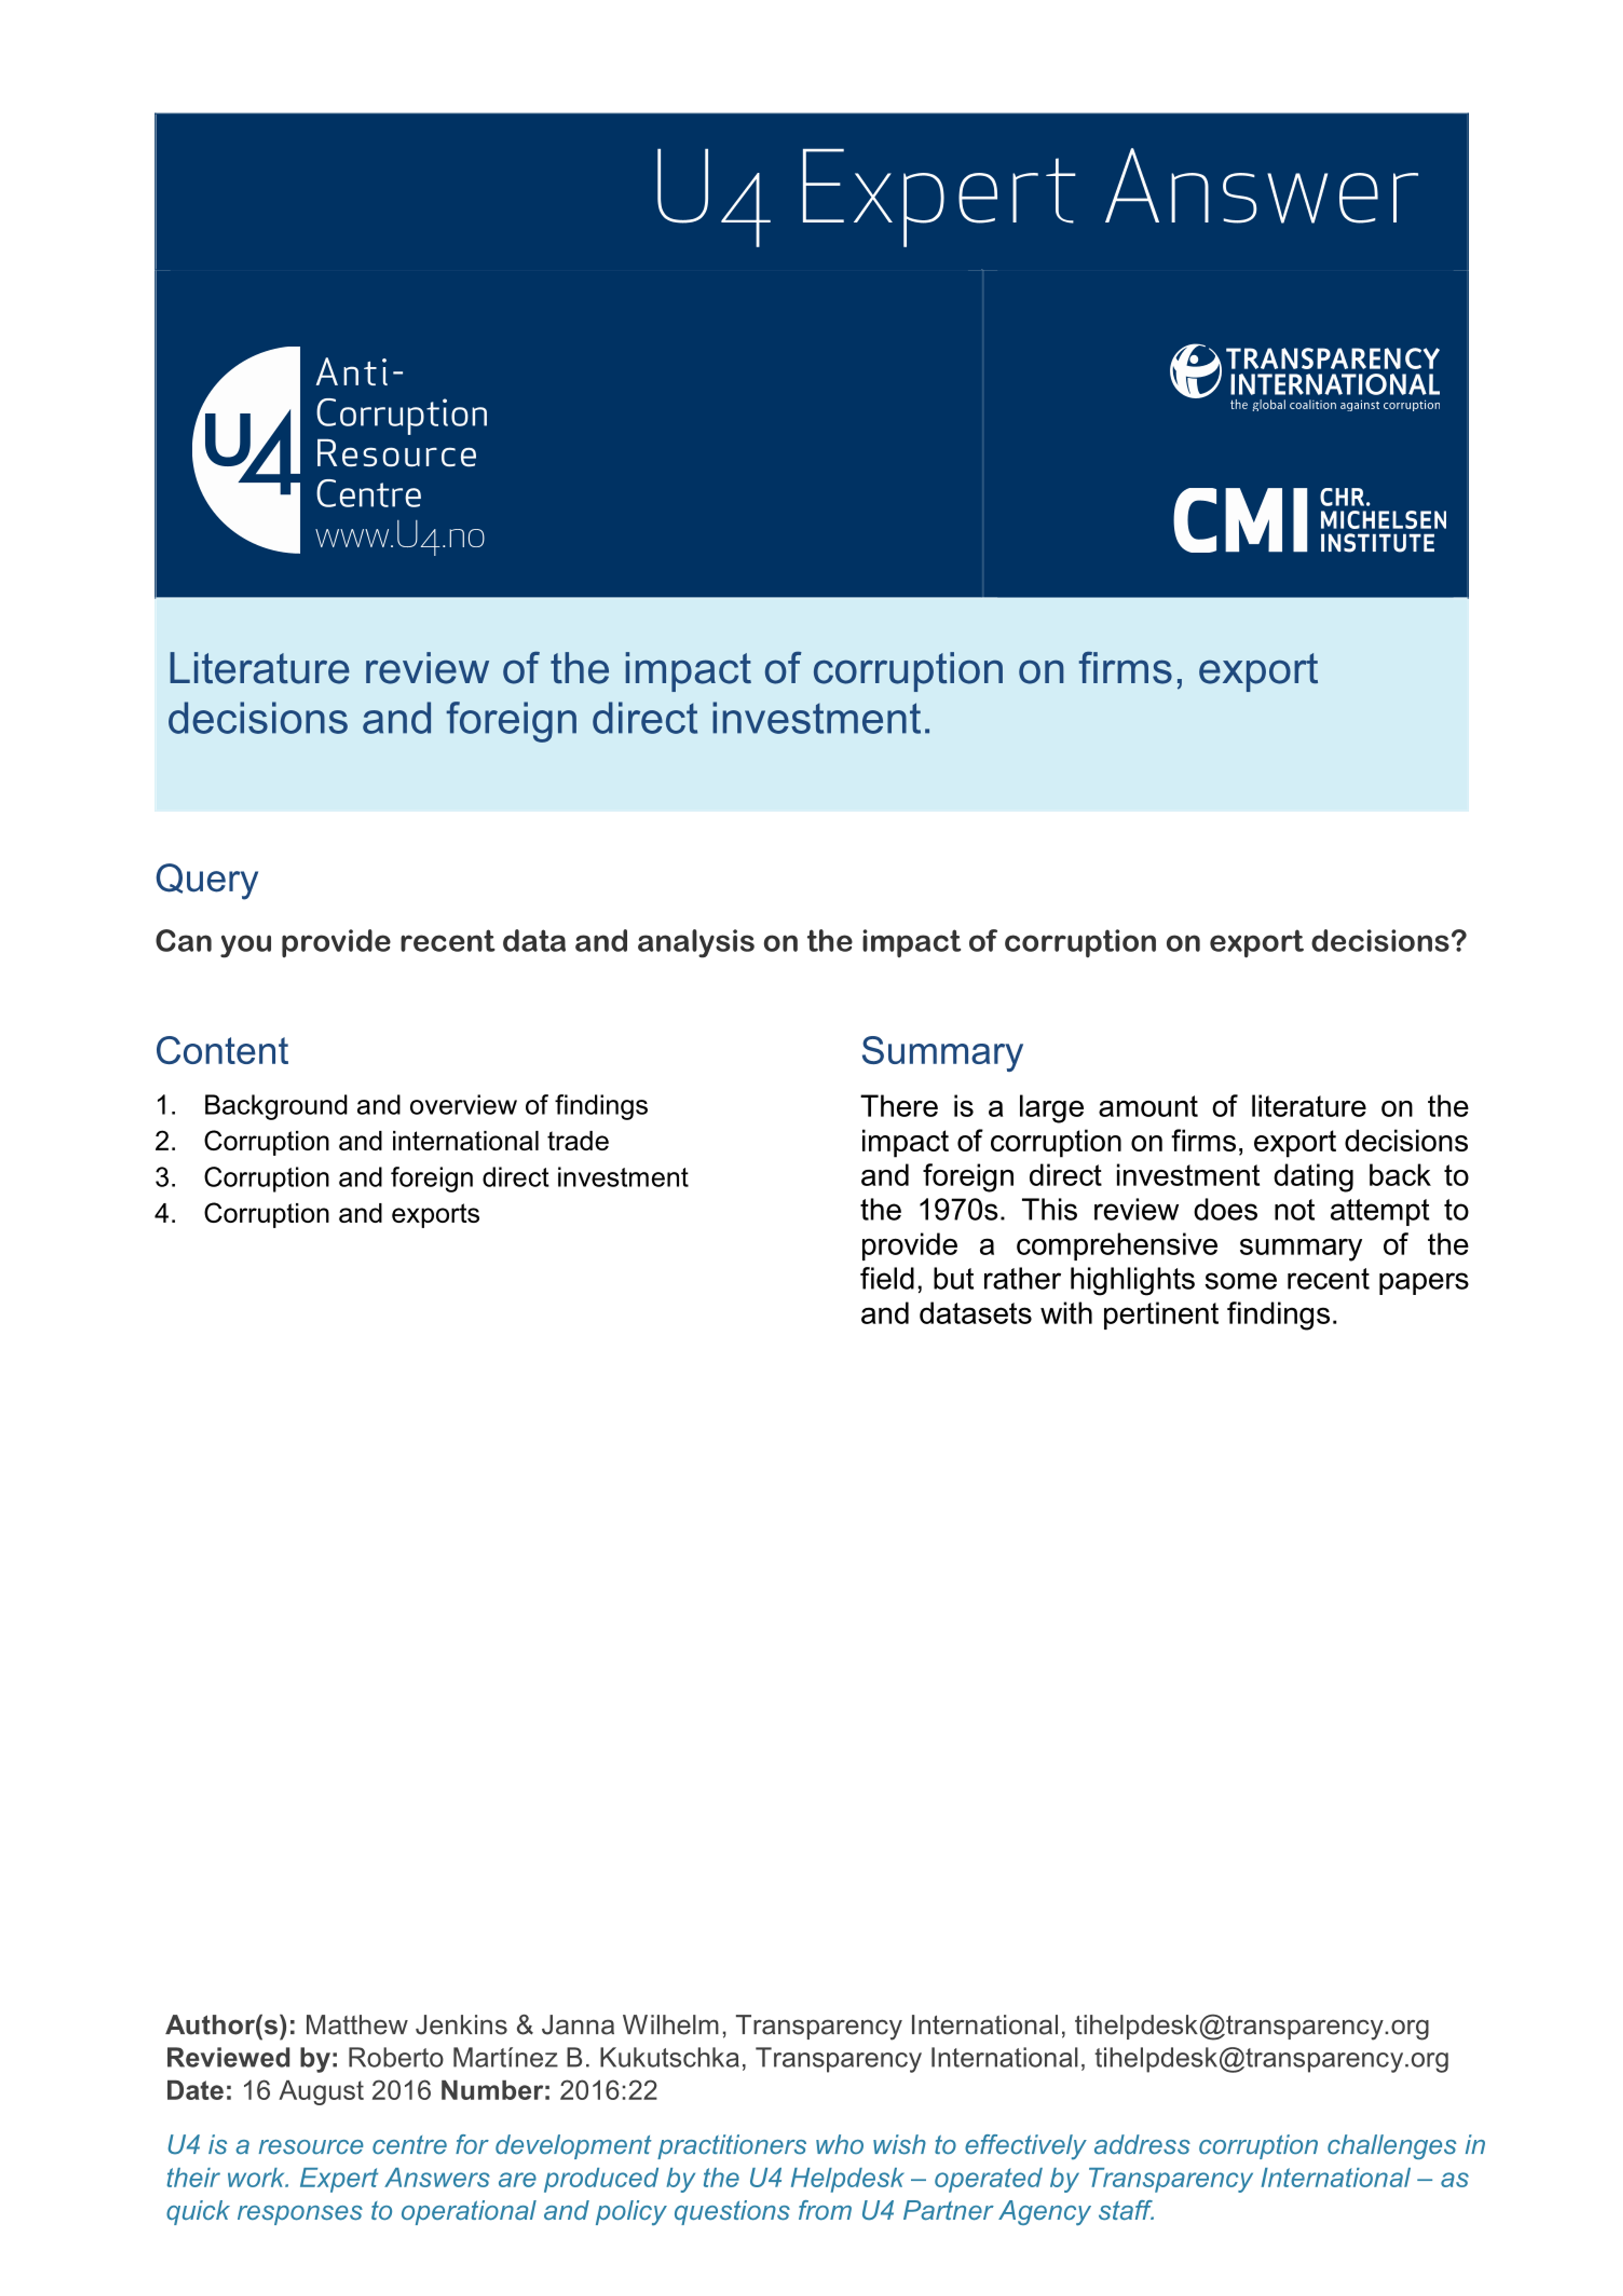 Literature review of the impact of corruption on firms, export decisions and foreign direct investment. 